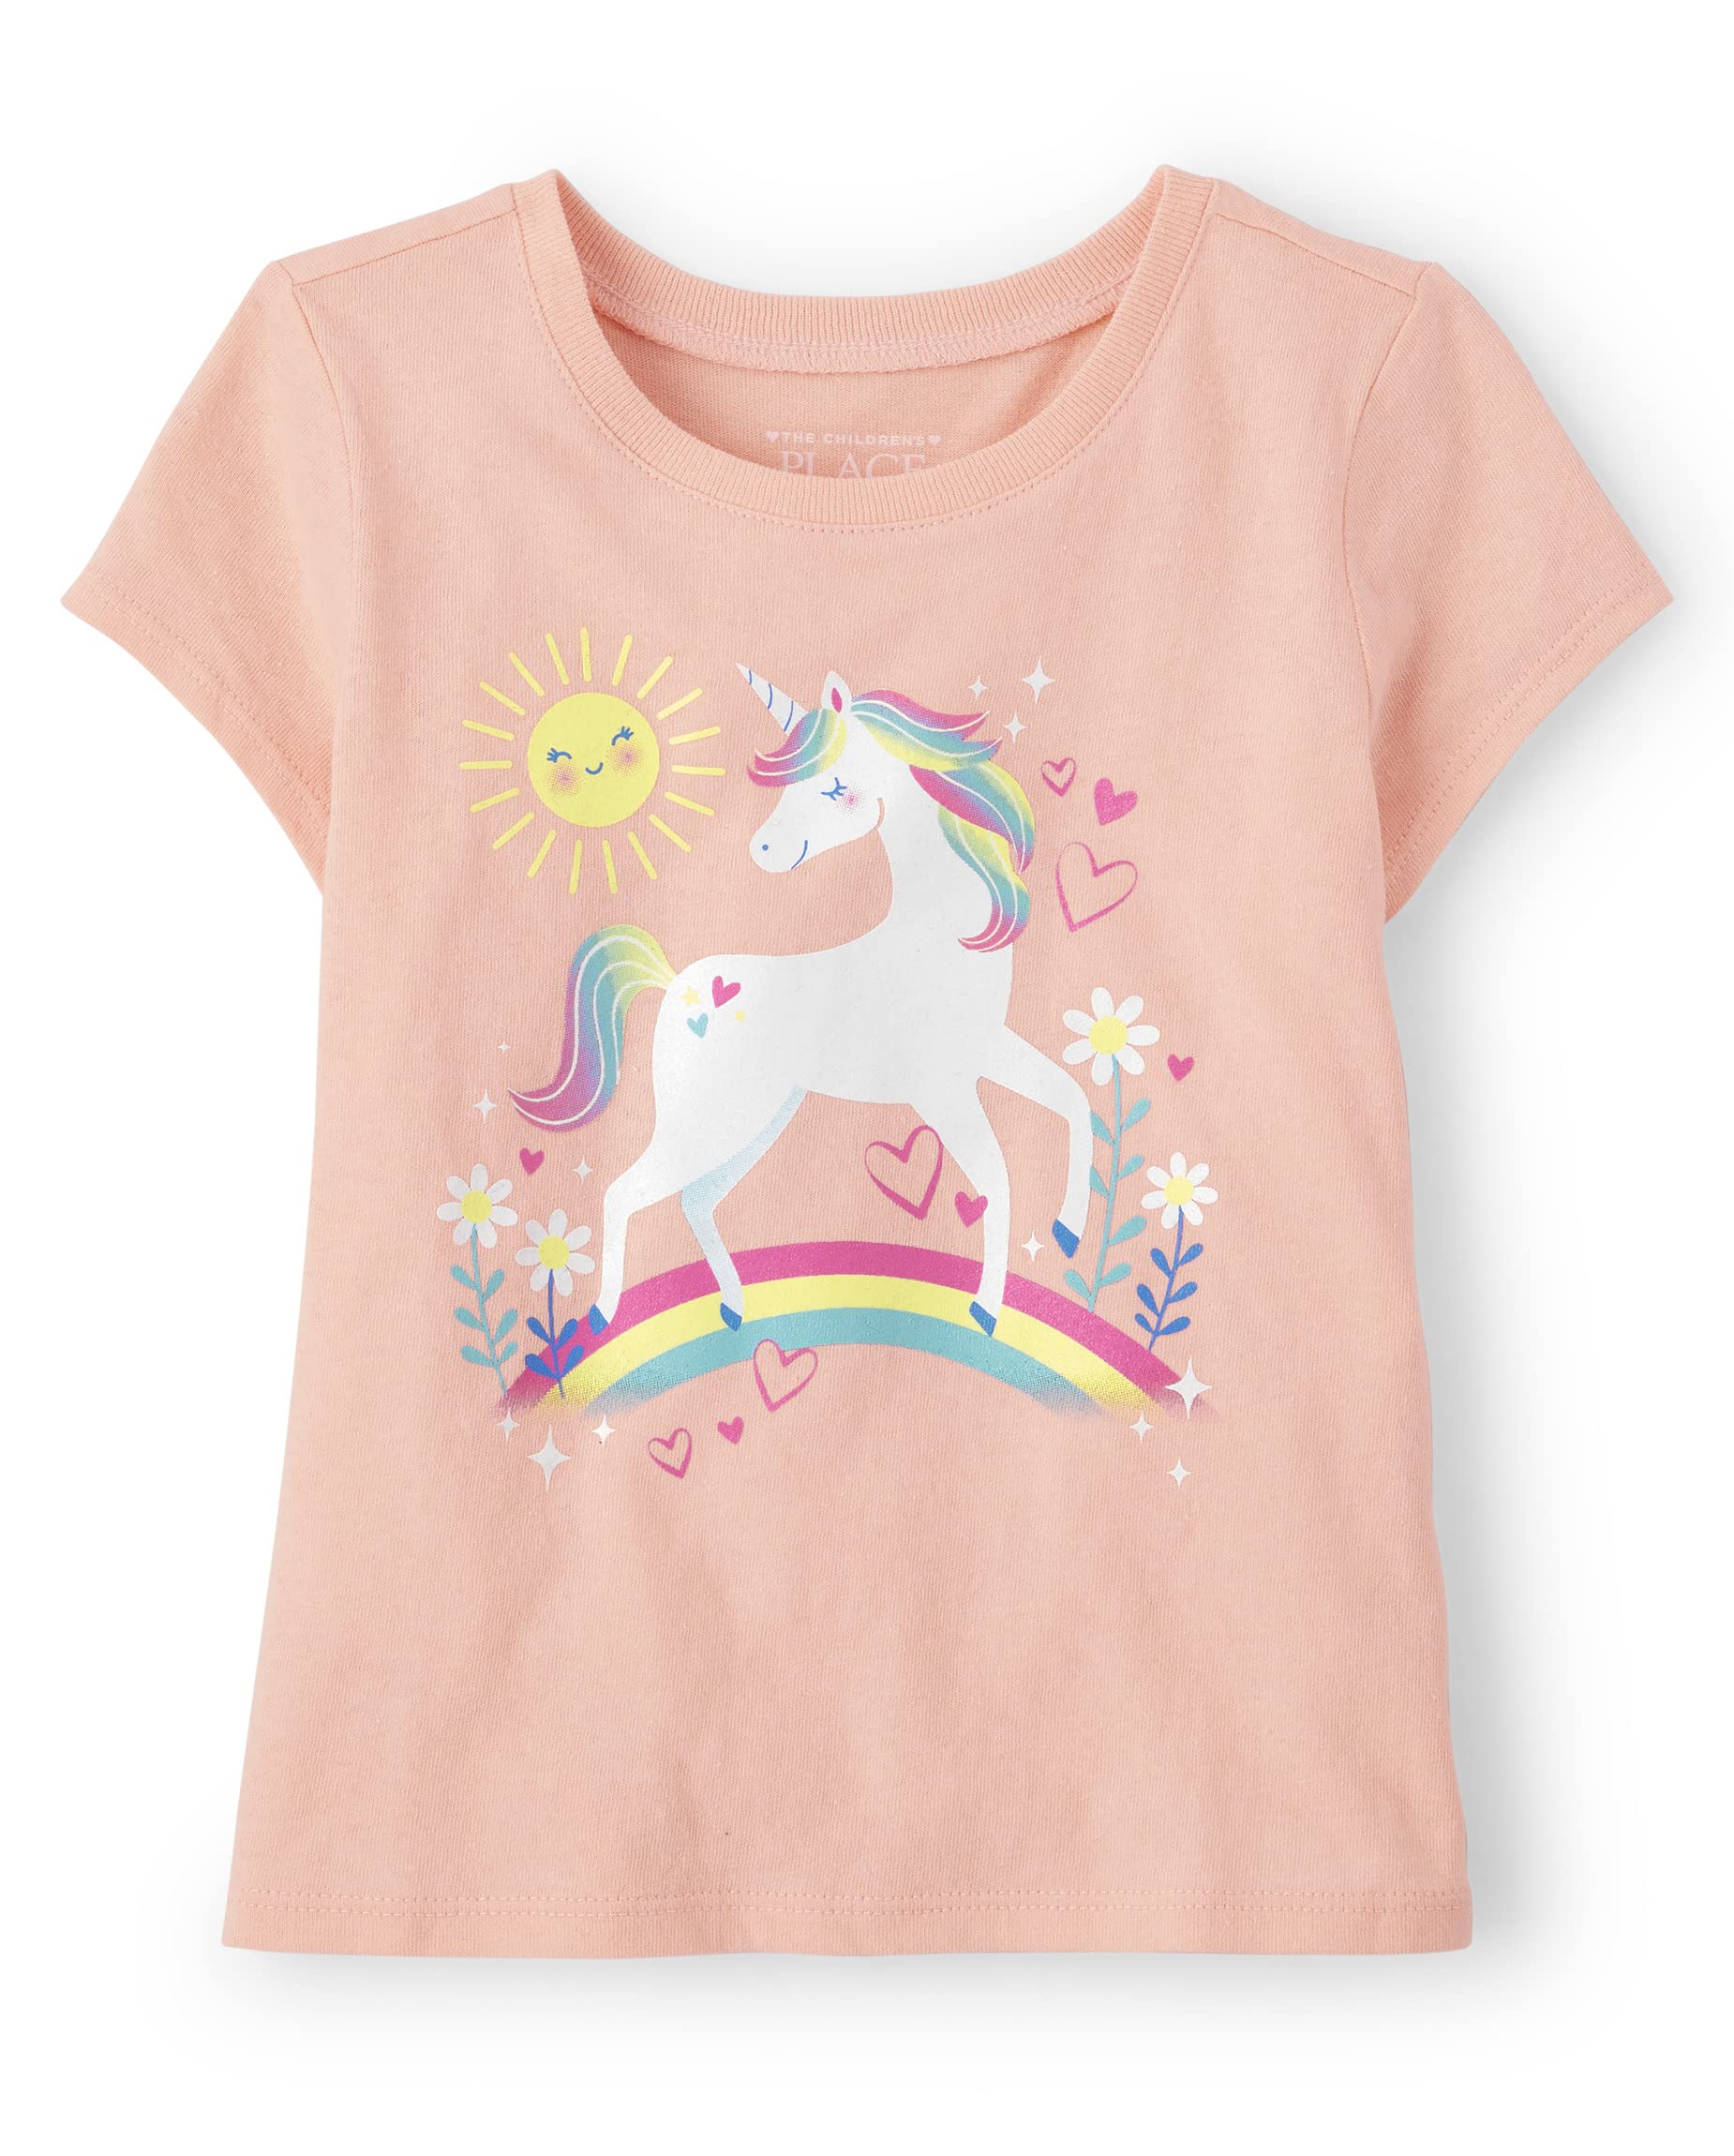 The Children's Place,And Toddler Girls Short Sleeve Graphic T-shirt,Baby-Girls,Unicorn Glow,5T